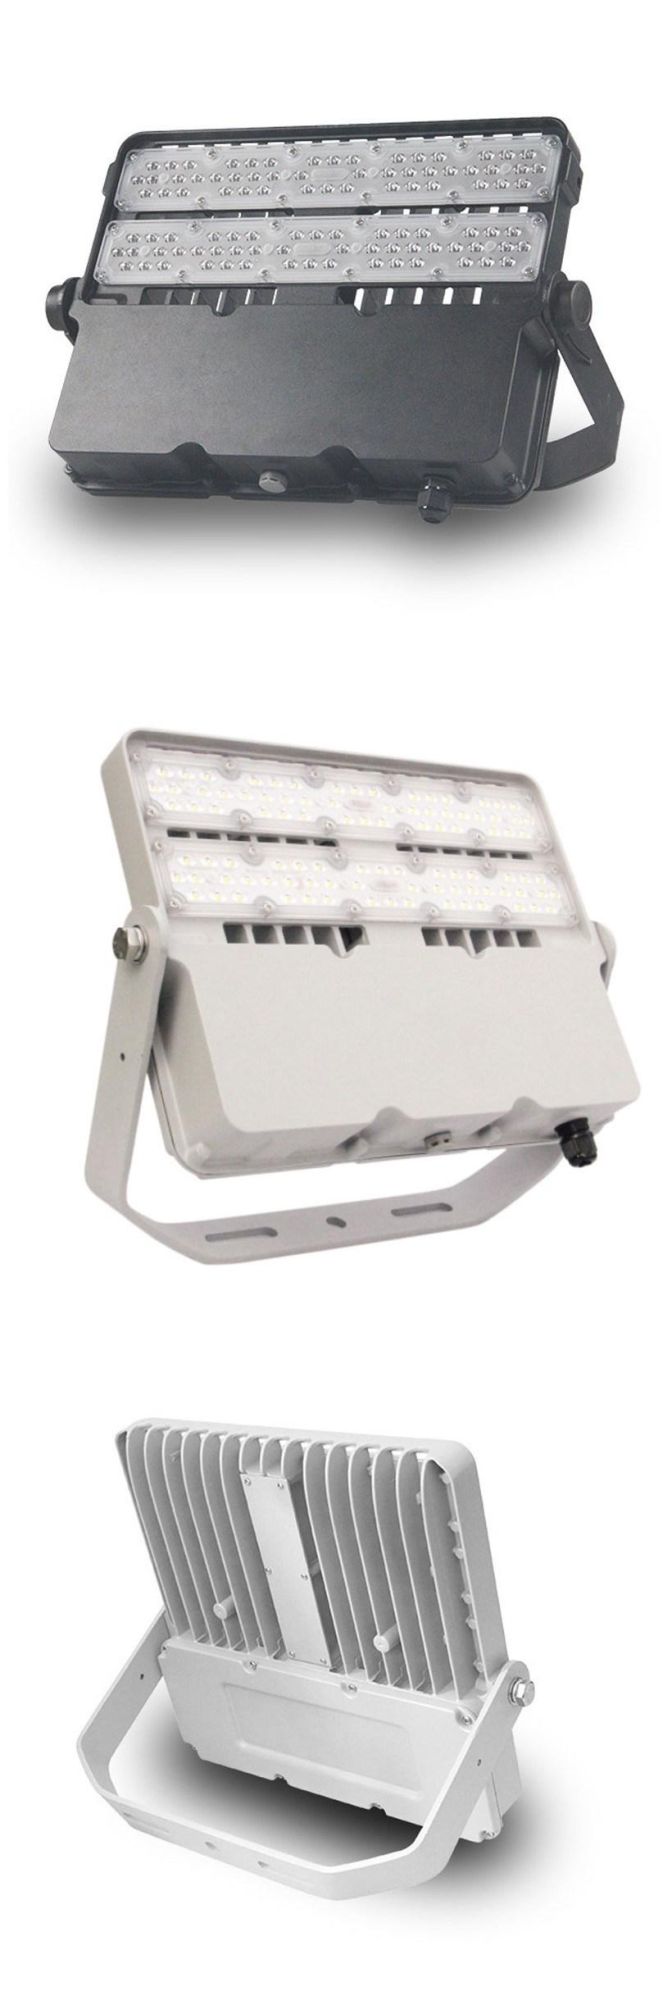 High Lumens Waterproof SMD LED Projector Light with 150lm/W for Outdoor Parking Lot Lighting